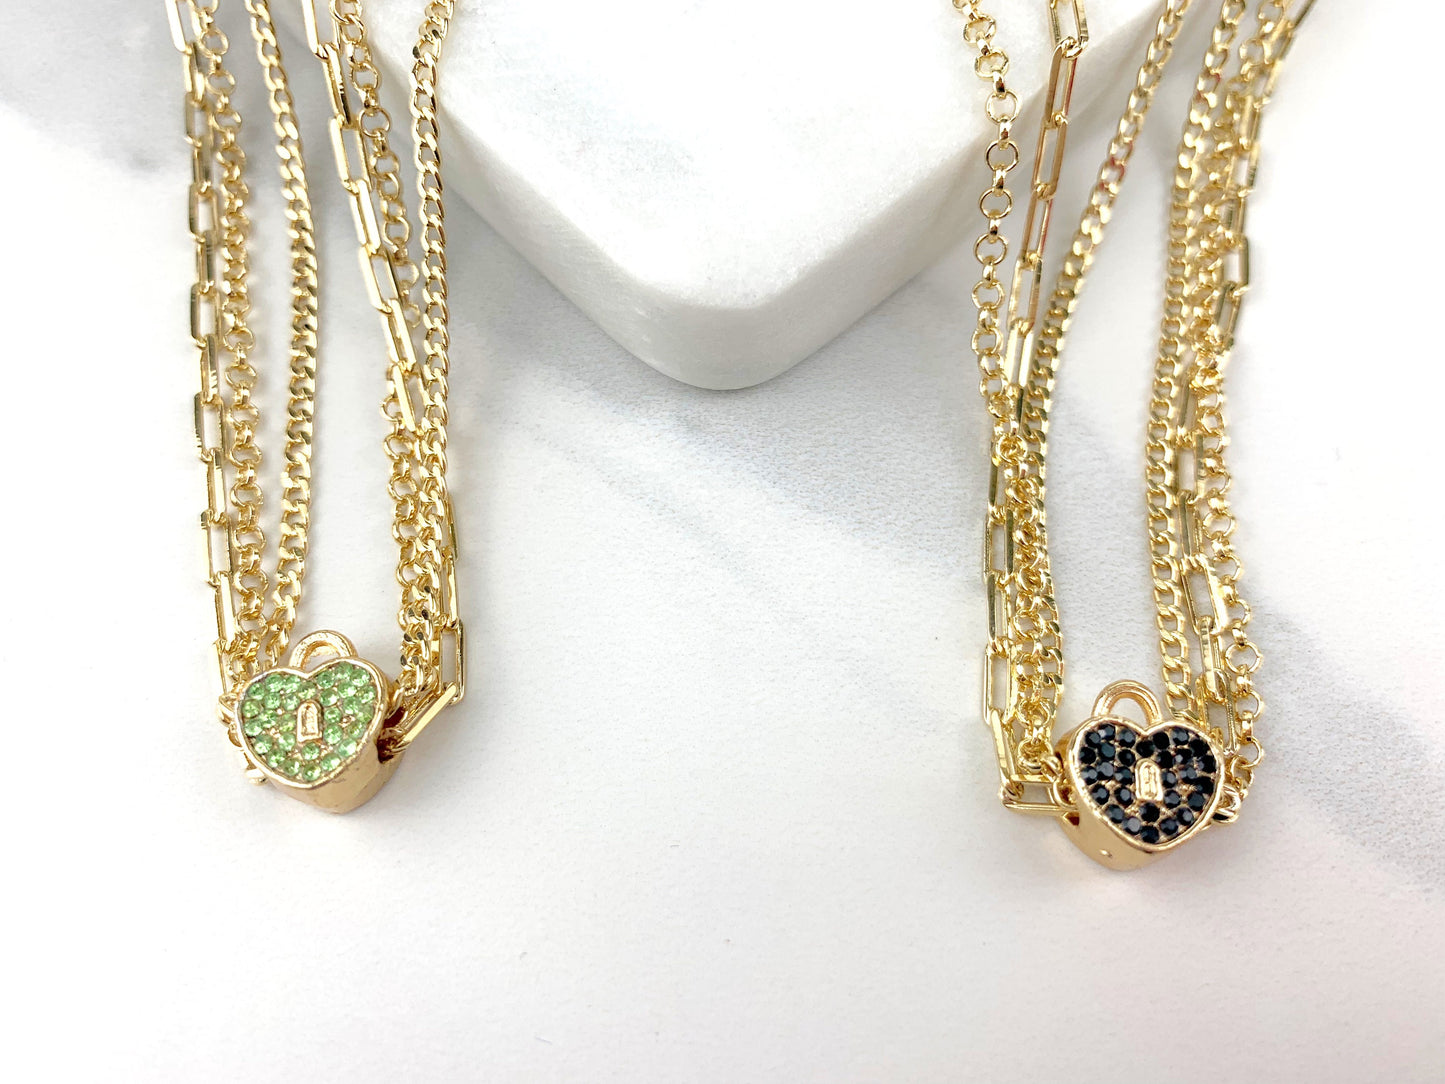 18k Gold Filled with CZ Tiny Black and Green Lock Pendant,PaperClip,Cuban Link, Round Box Necklace Choker For Wholesale and Jewelry Supplies